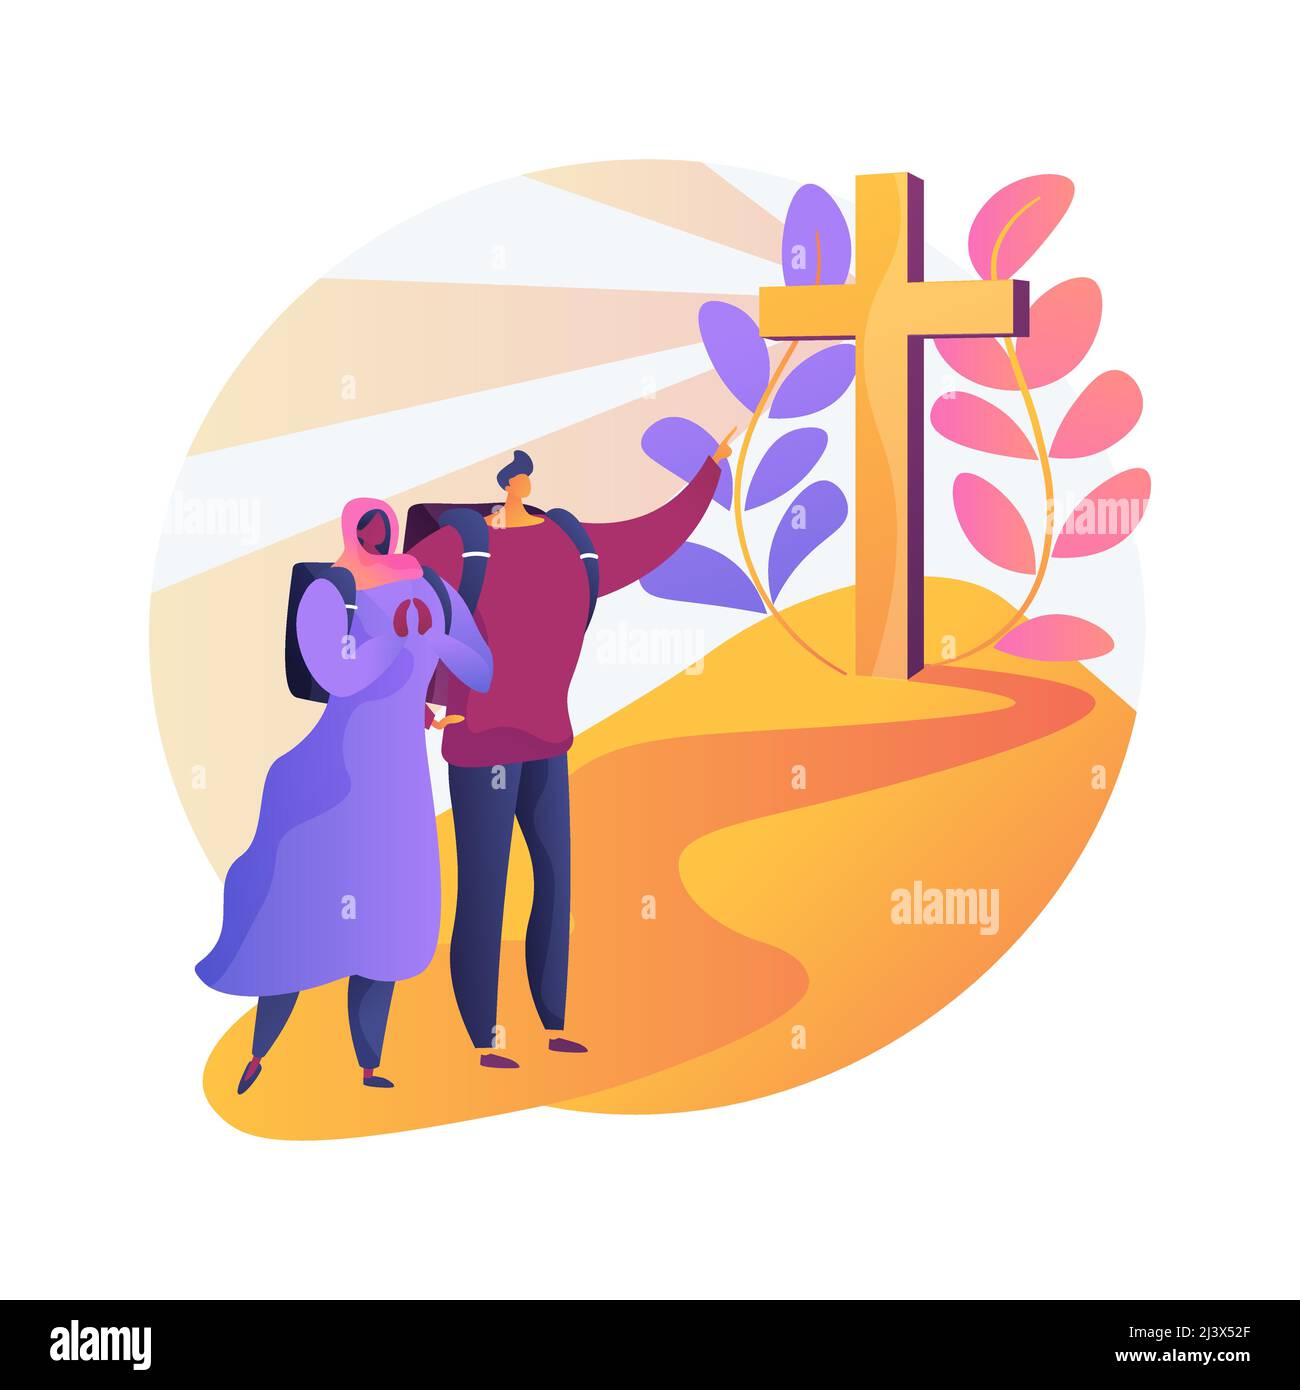 Christian pilgrimages abstract concept vector illustration. Go on pilgrimage, visit saint places, seeking god, christian nuns, monks in monastery, rel Stock Vector